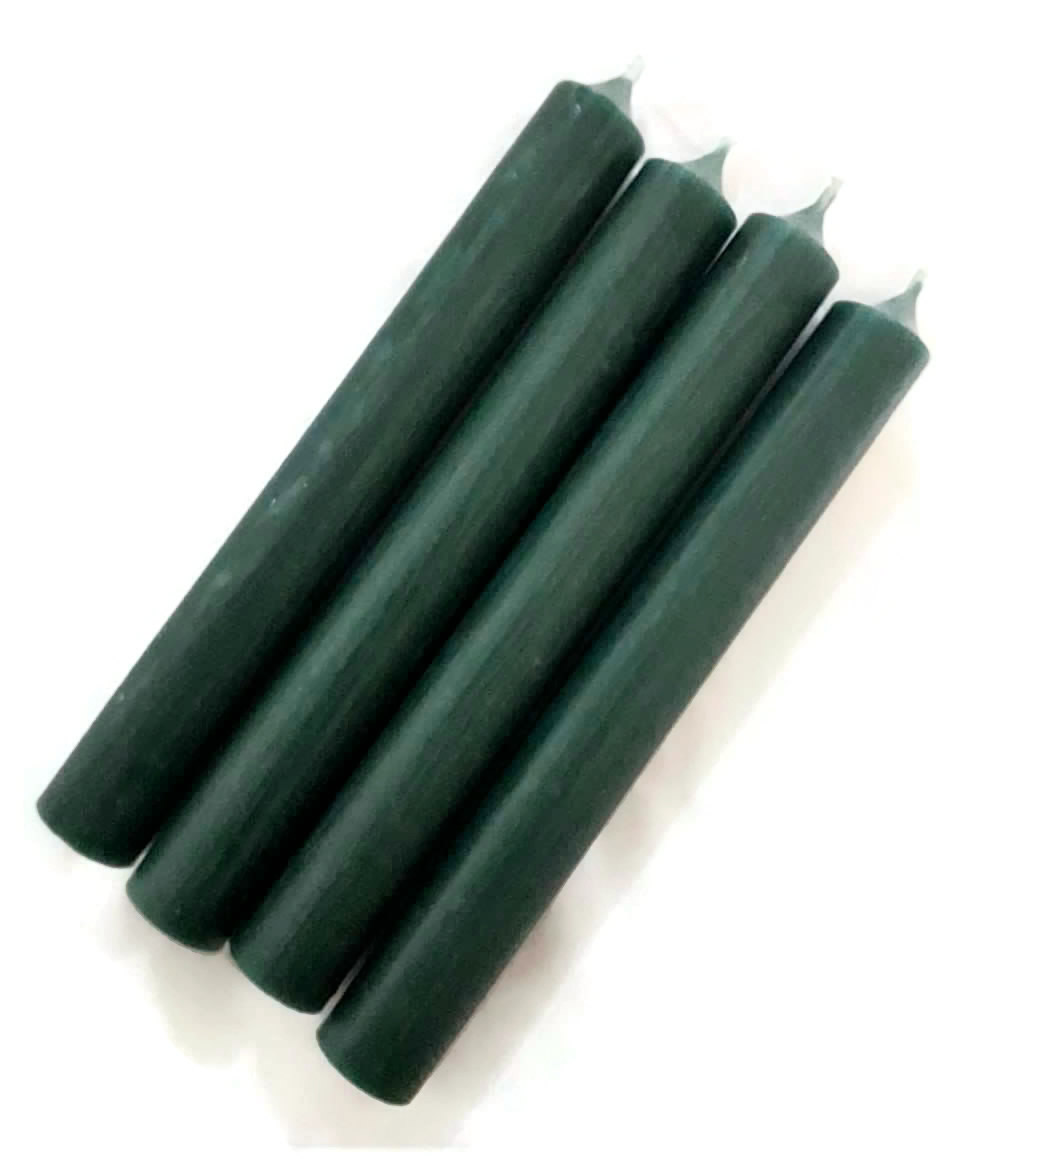 Dark Green Solid Colour Rustic 7 Inch Candles